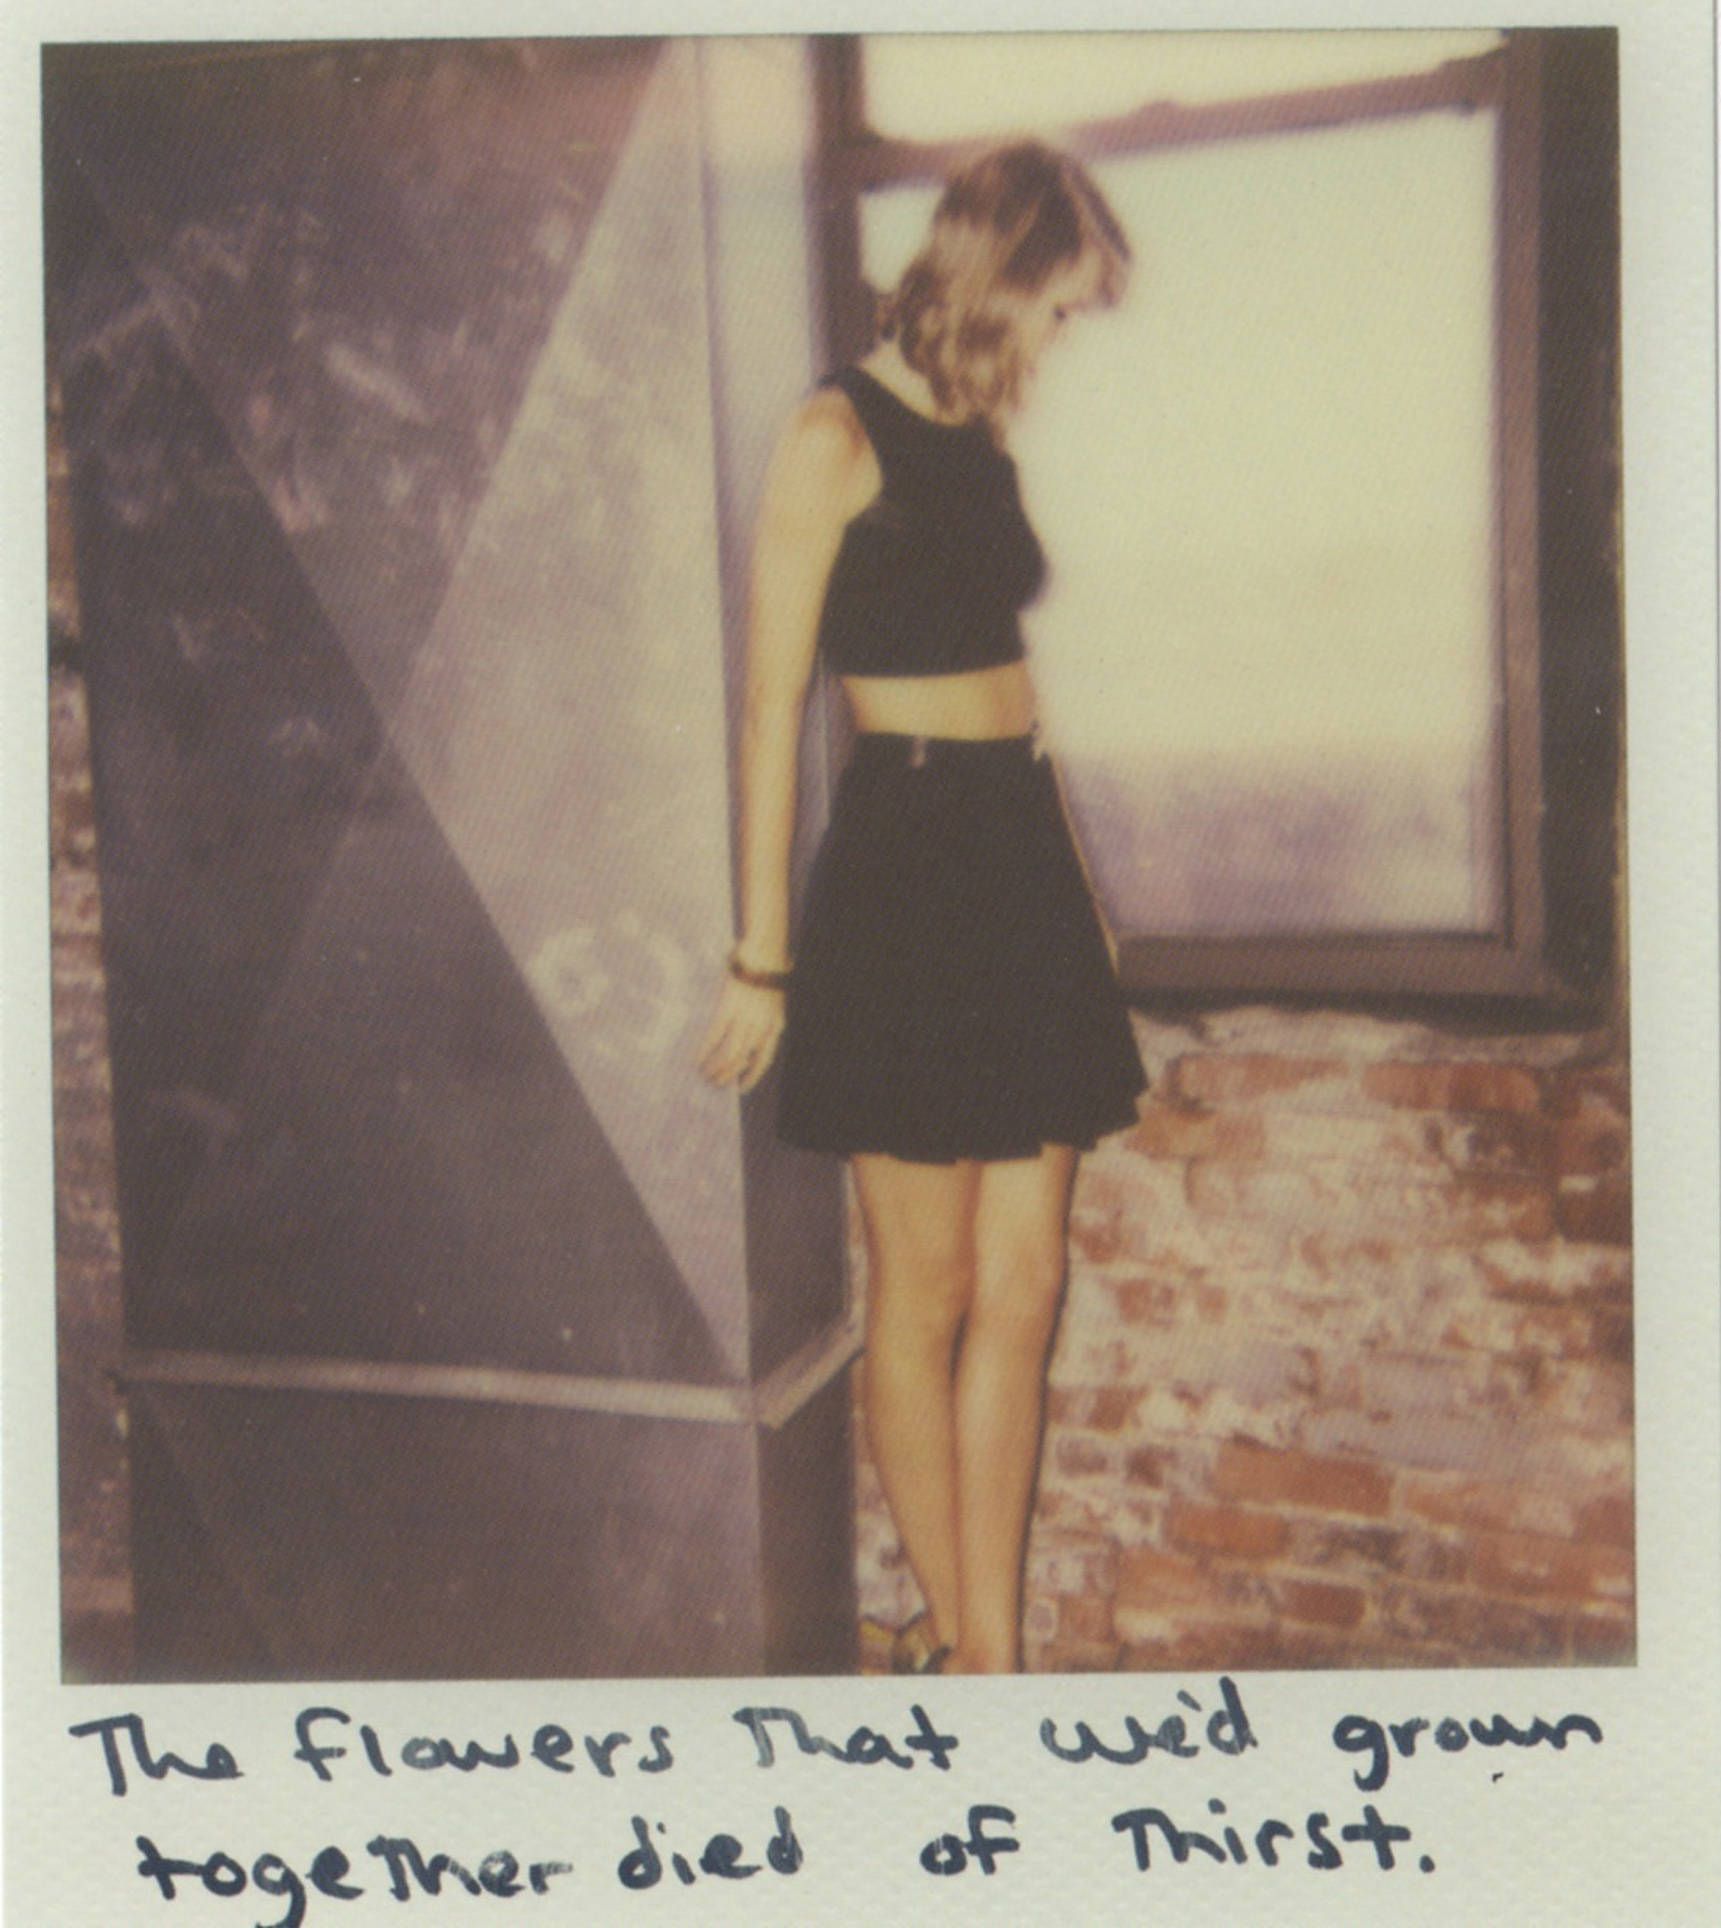 A woman standing next to brick wall - Taylor Swift